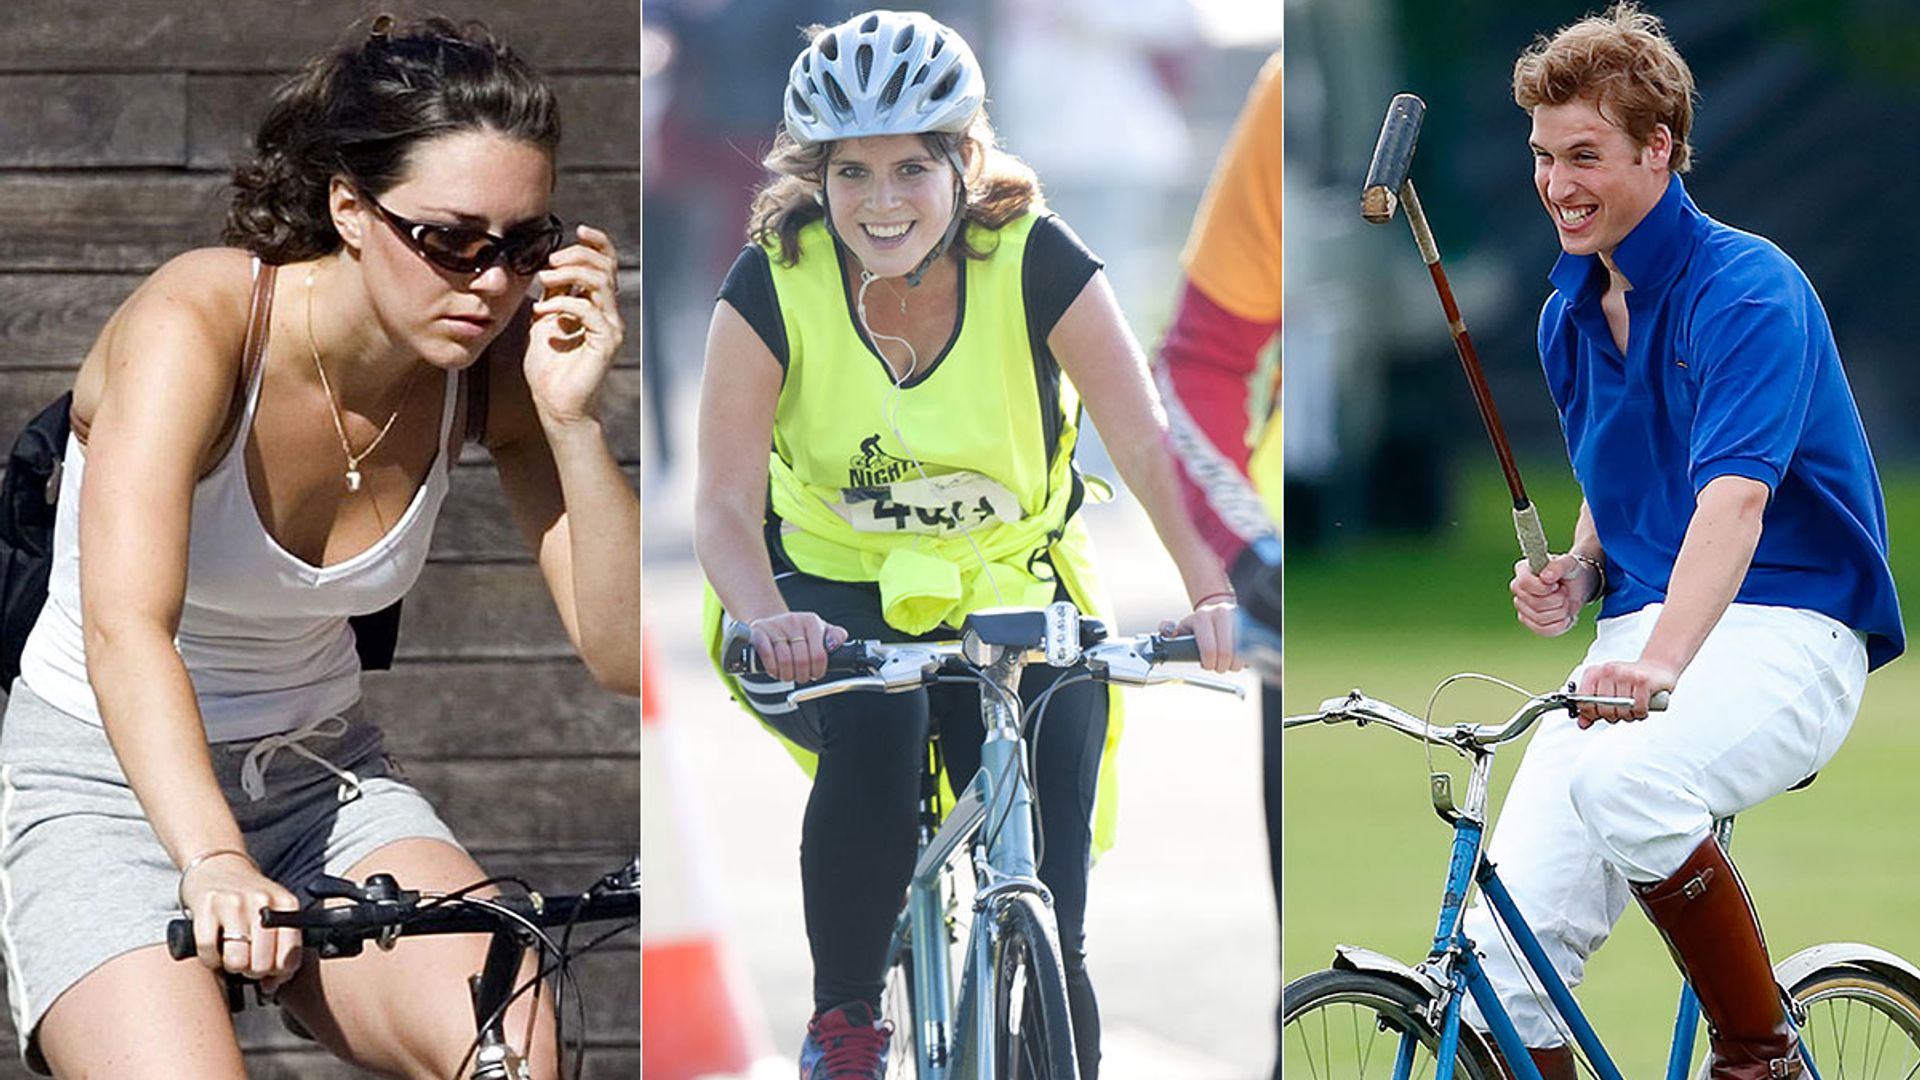 On your bike! 15 fun photos of the royals enjoying a cycle ride